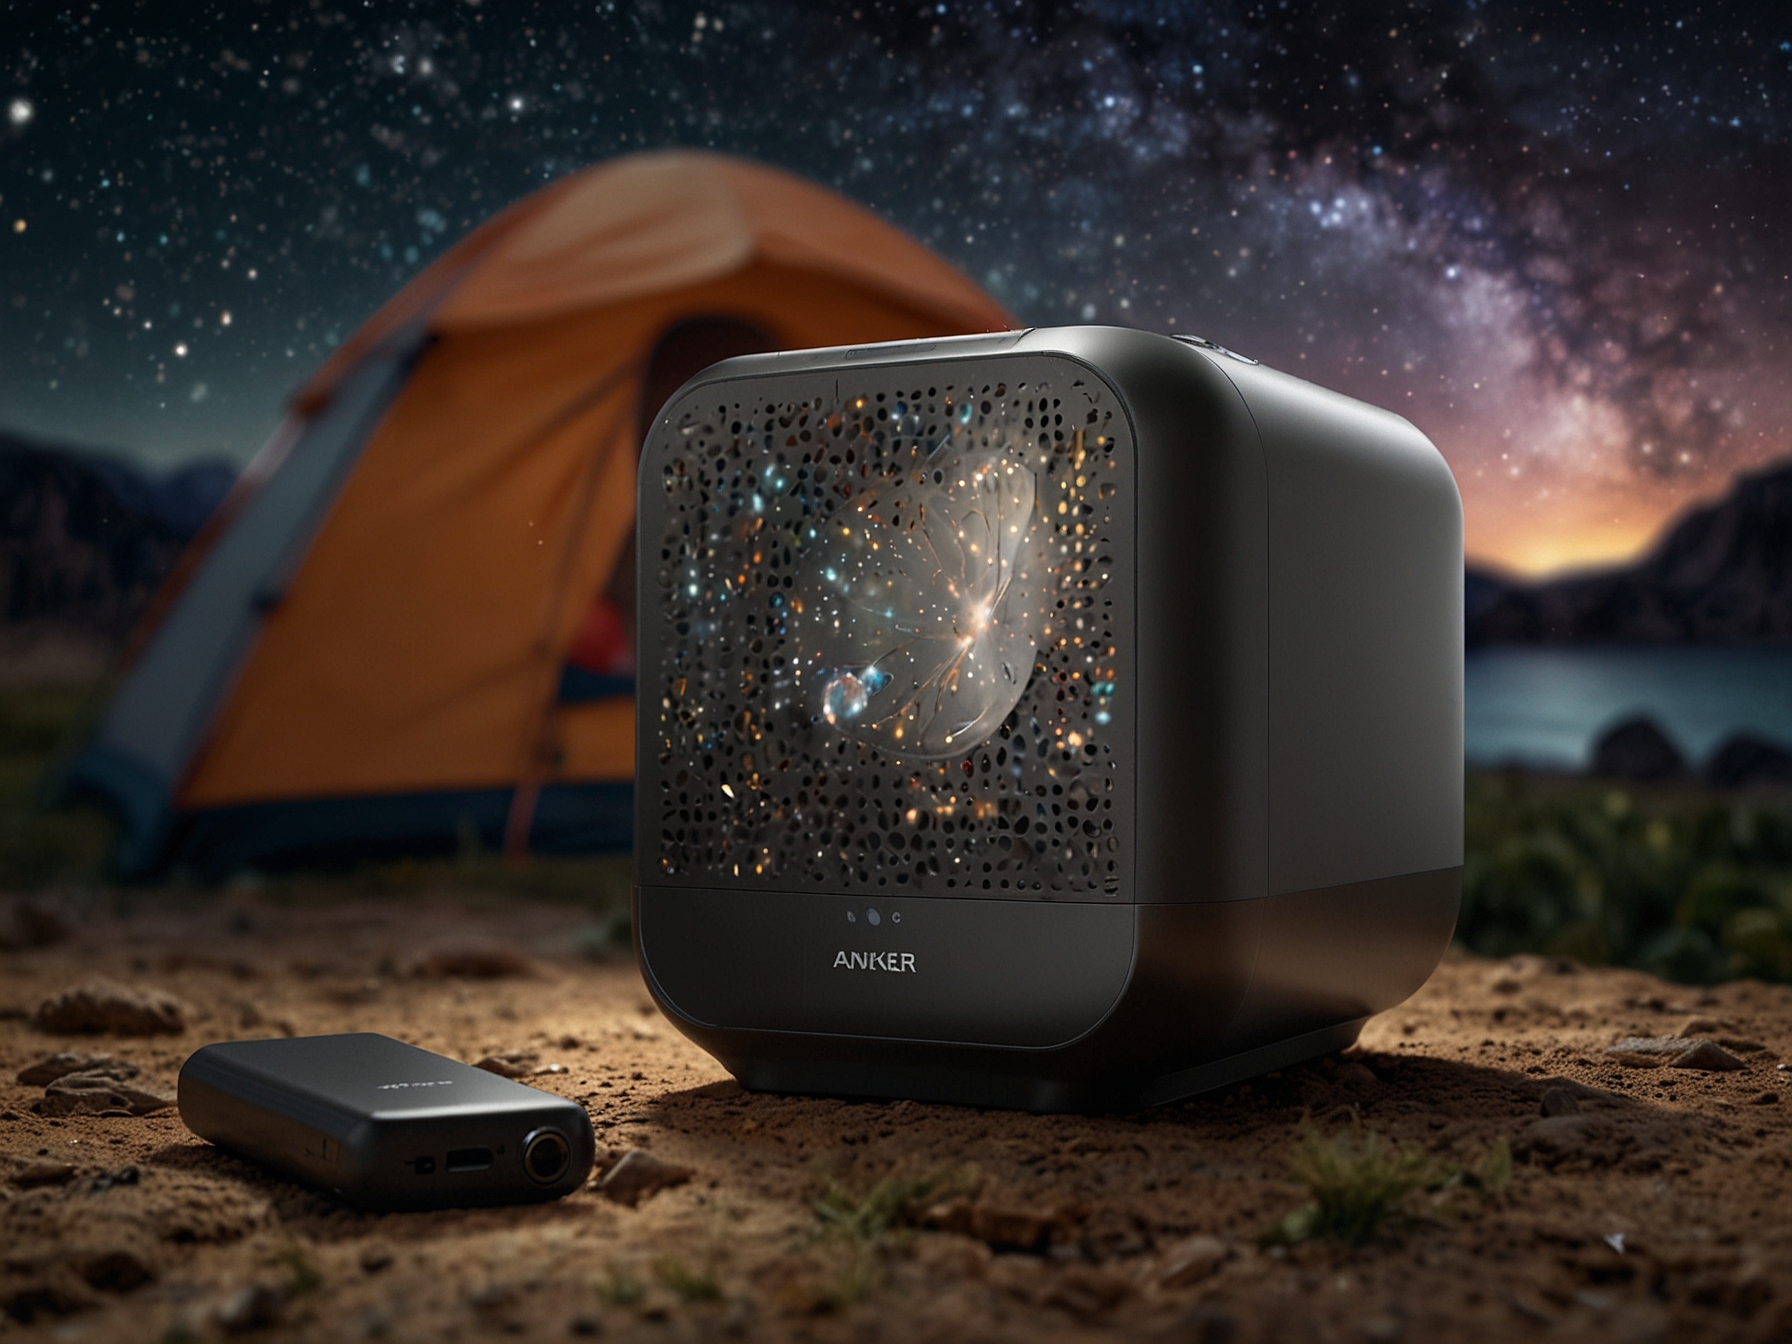 A compact Anker Nebula Capsule II projector is showcased, projecting a bright HD movie onto a screen during an outdoor camping trip, emphasizing its portability and robust battery life.